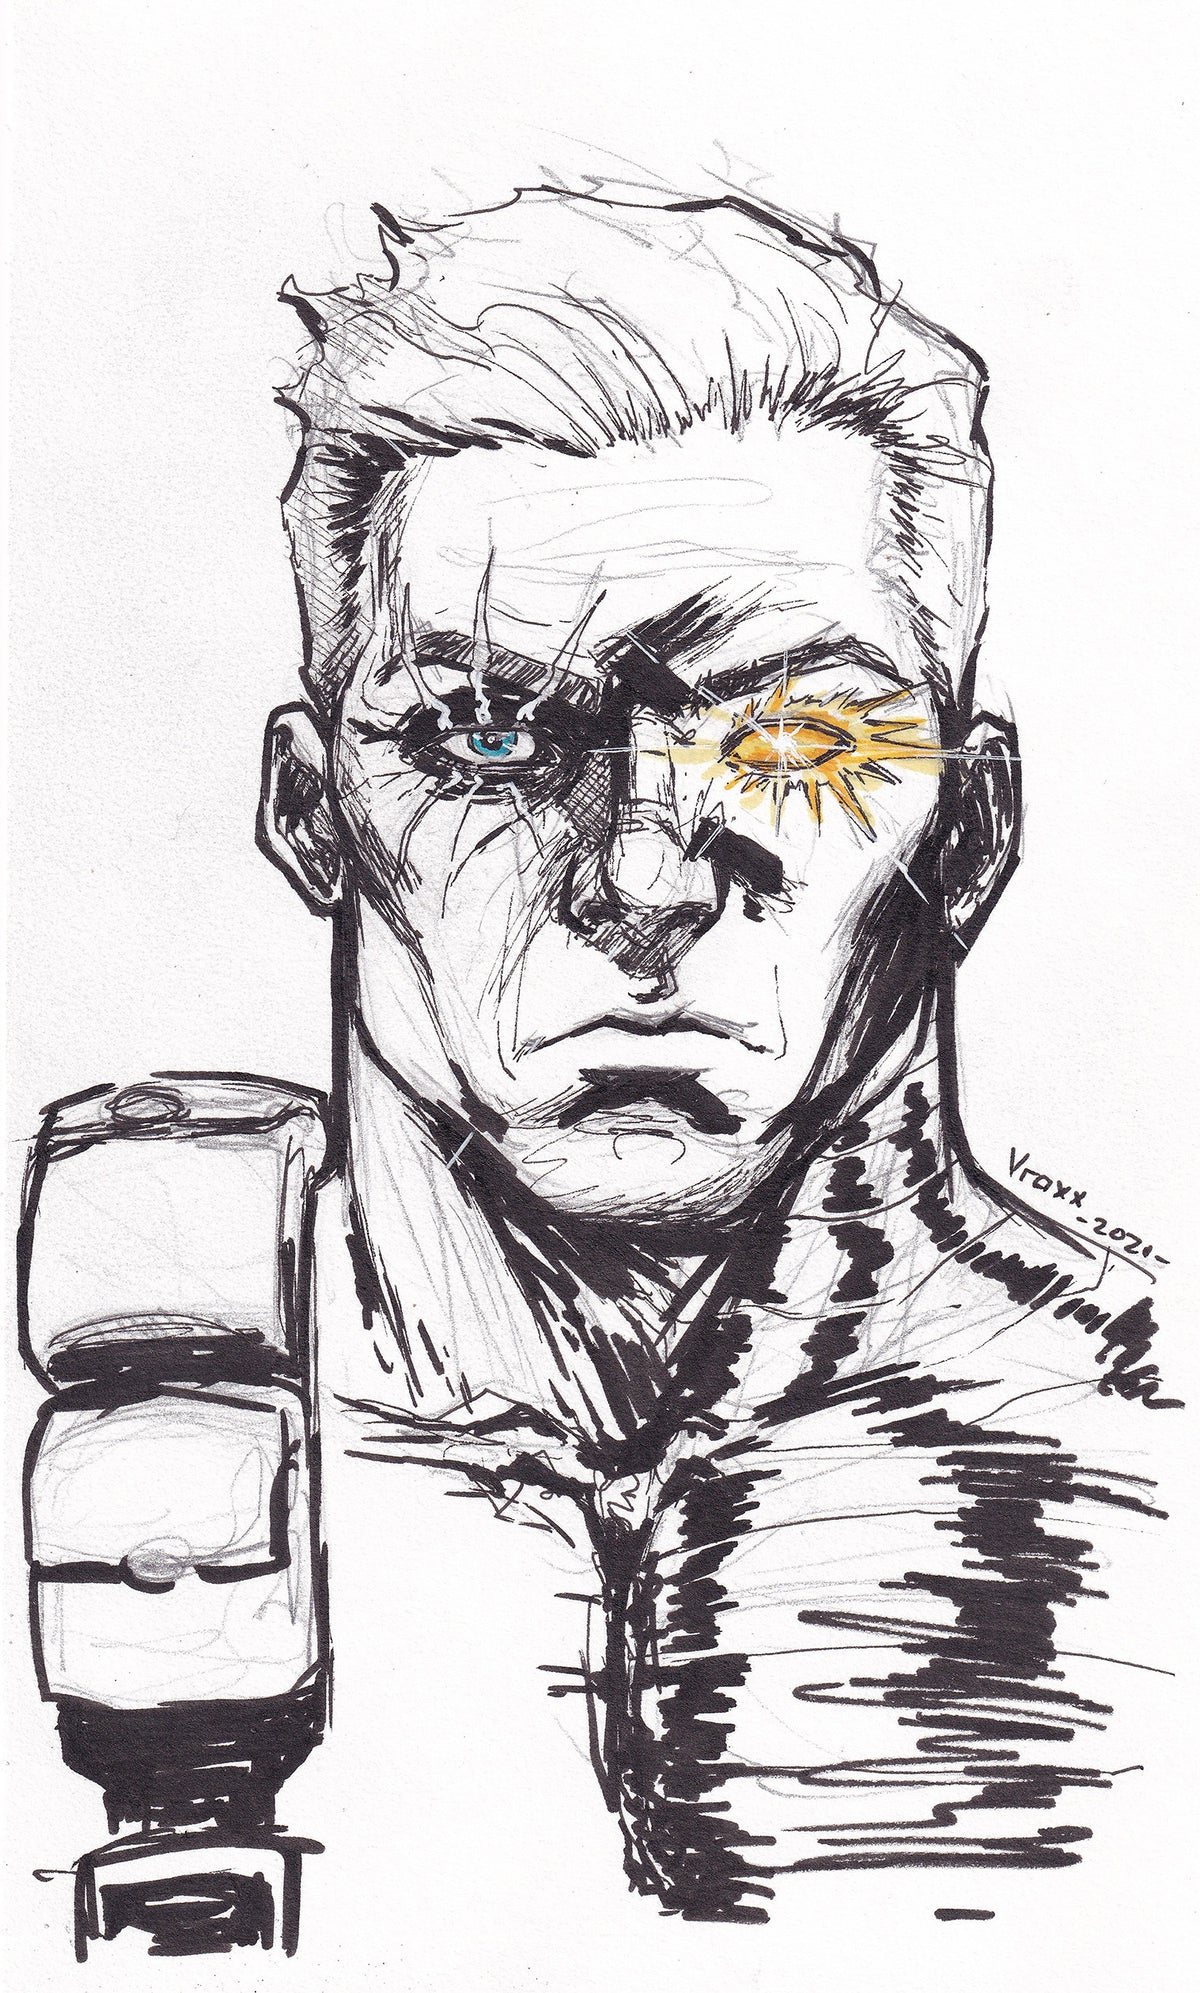 Cable - 5 1/8" x 8 1/2" - Original Art sold by Stronghold Collectibles